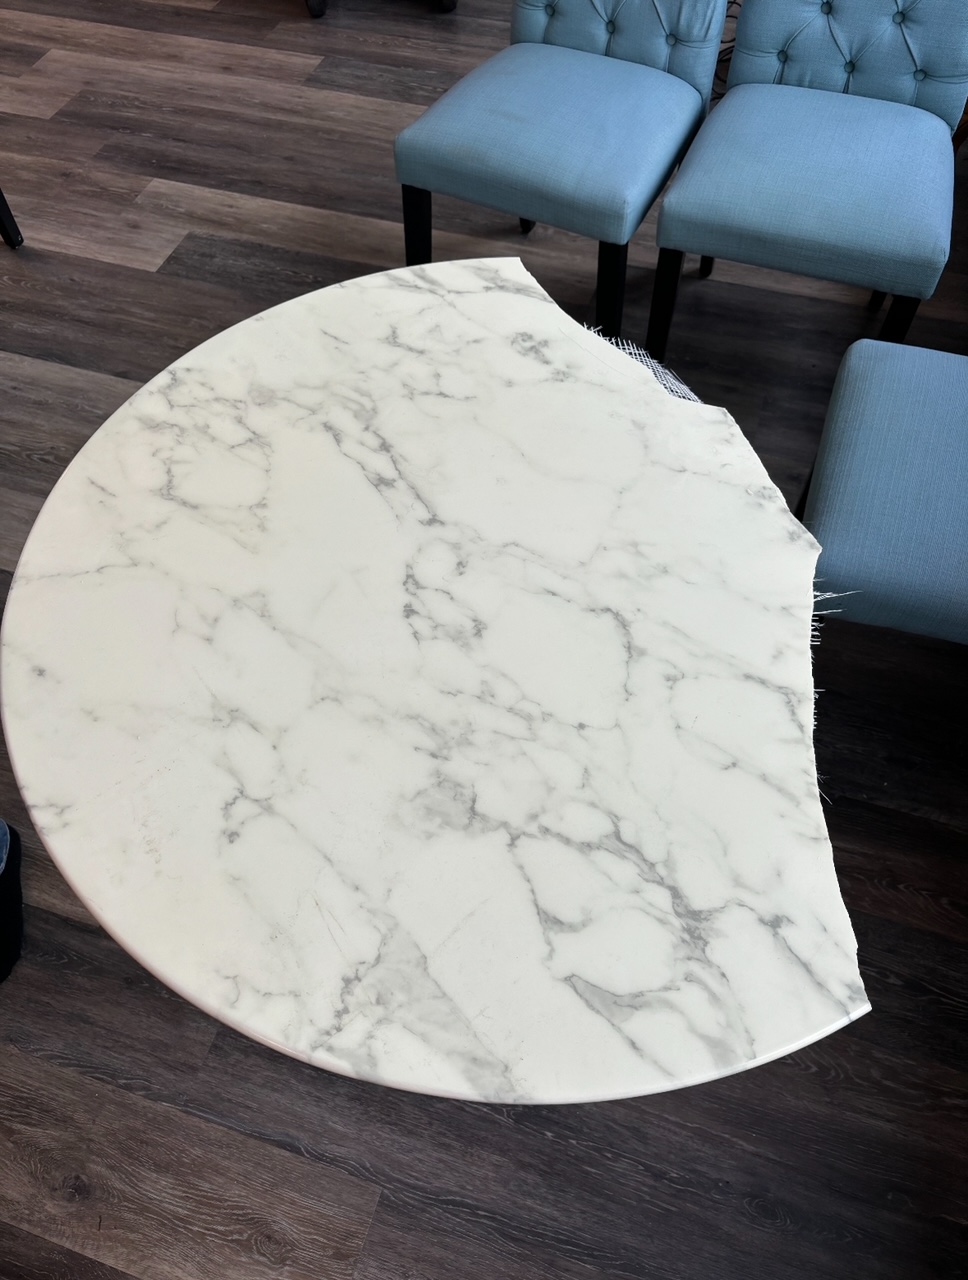 smashed marble table